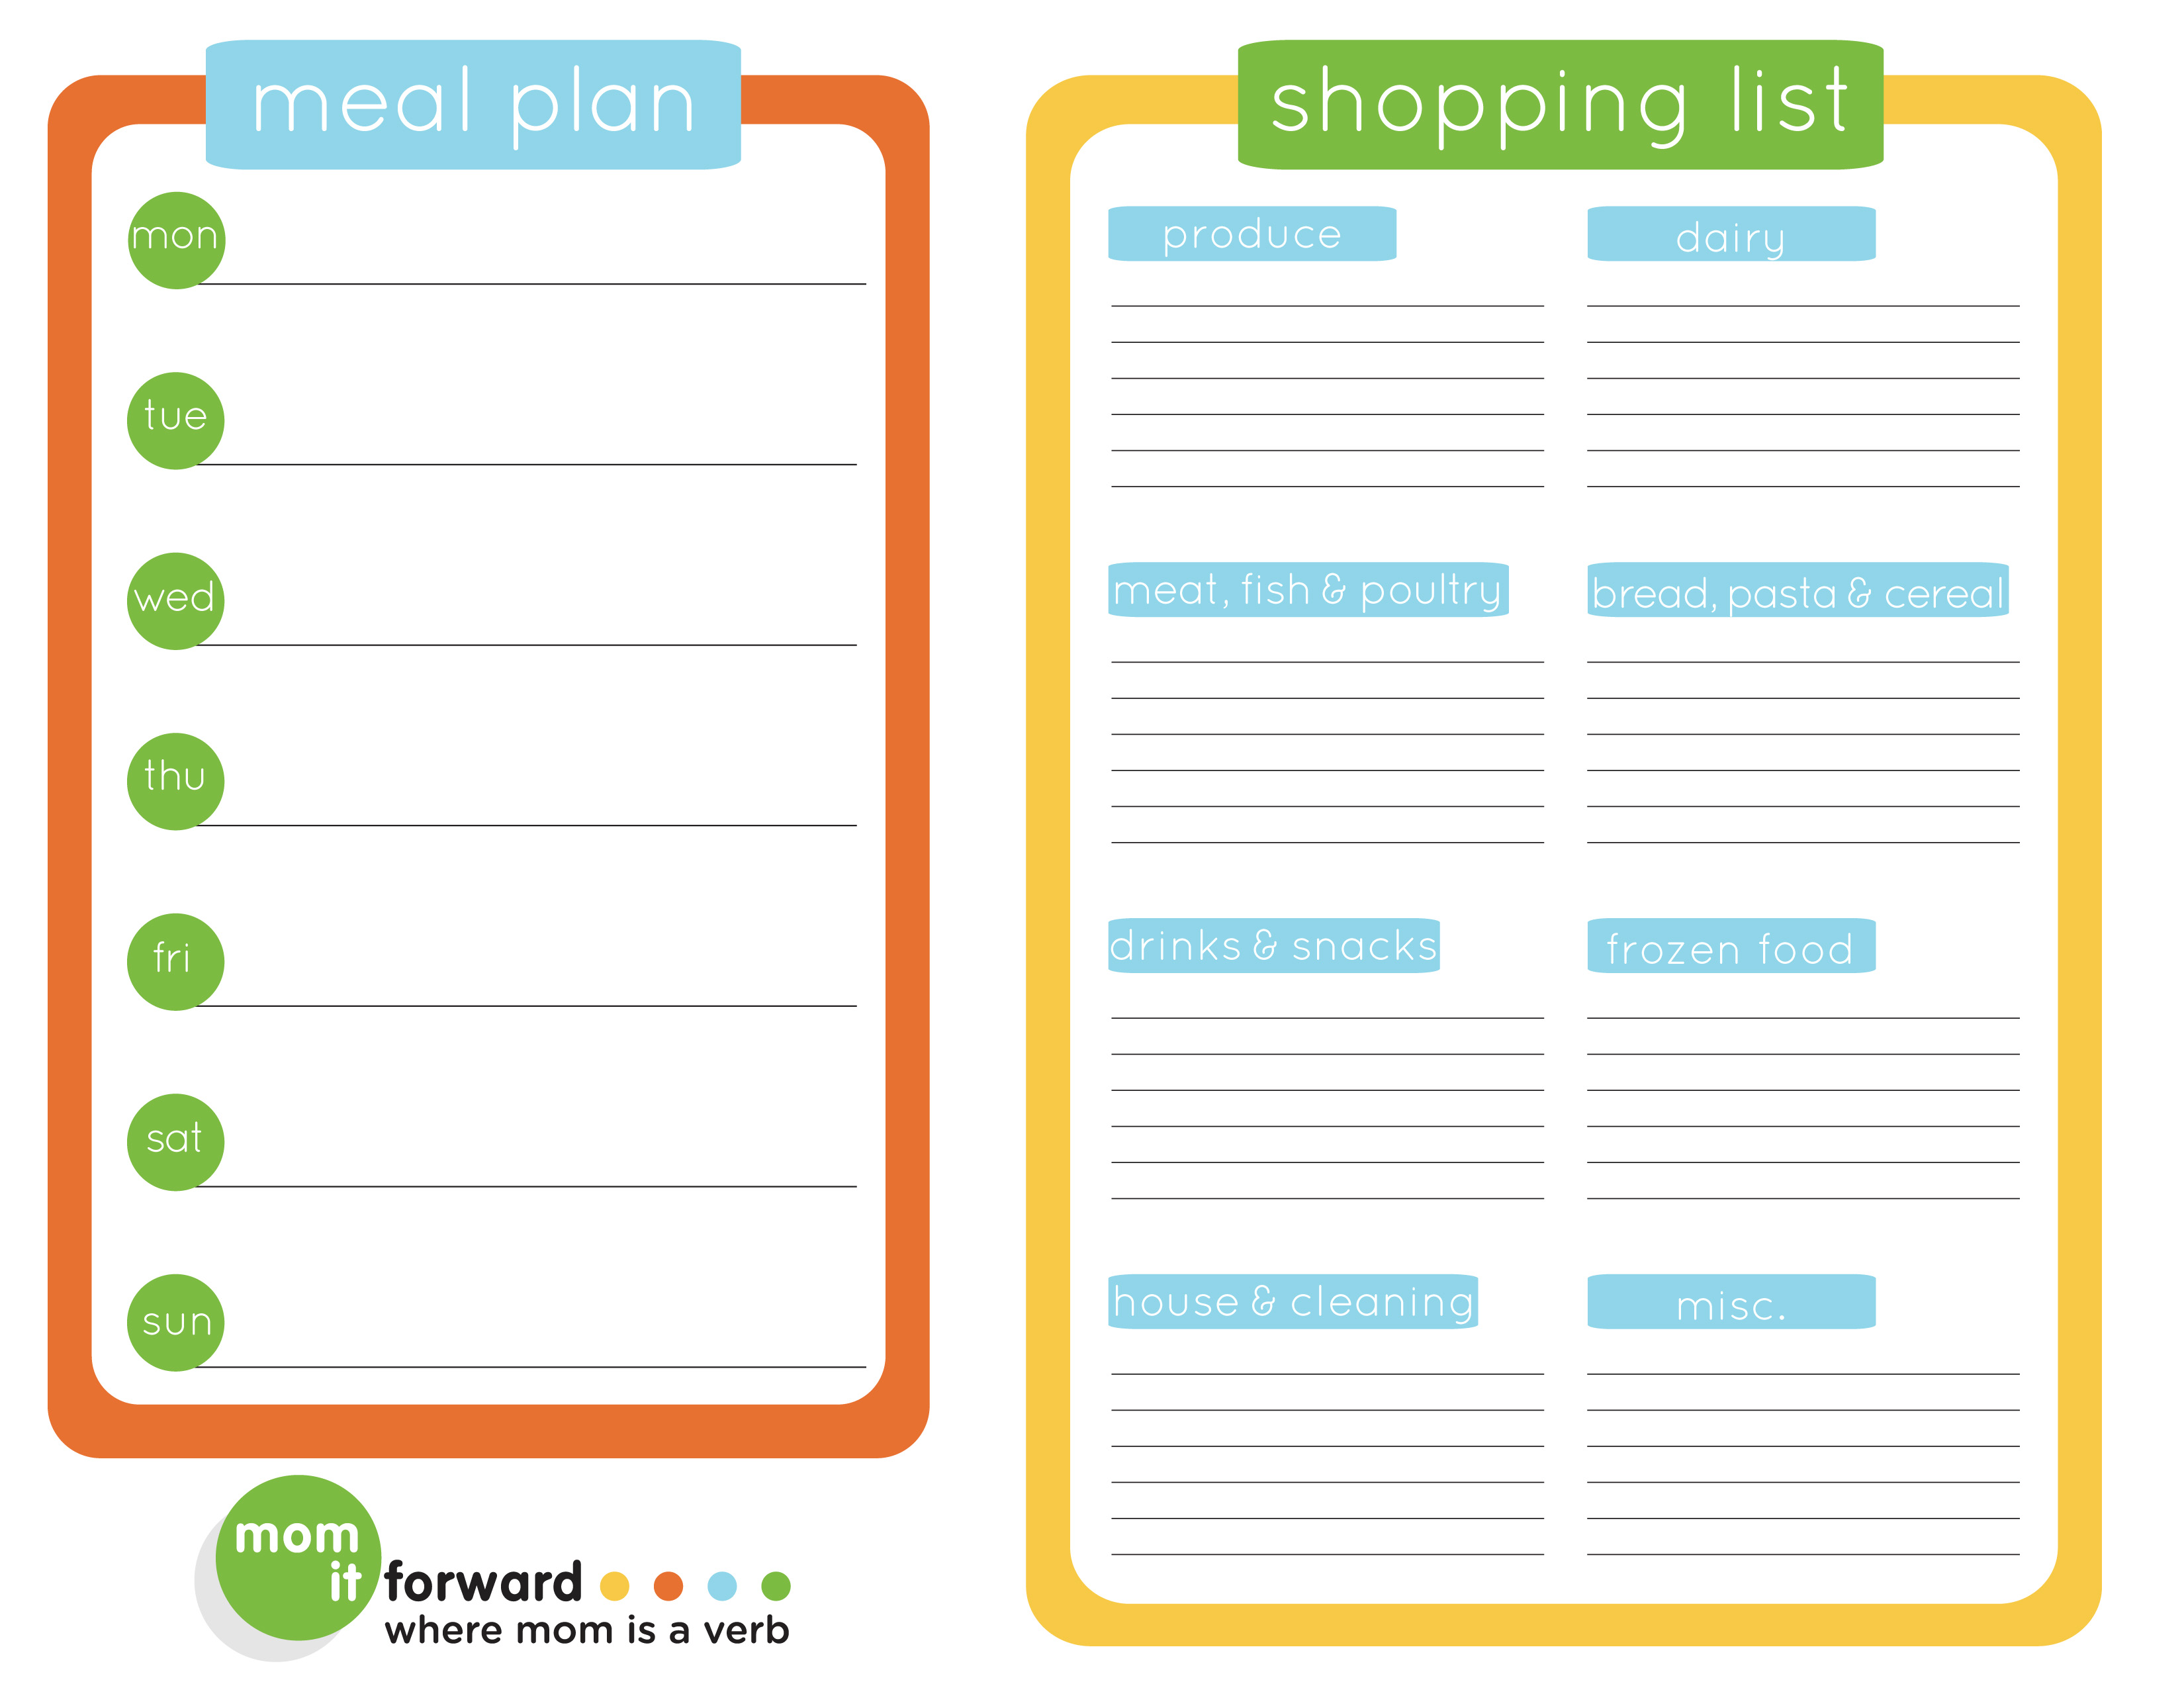 Meal Planner Weekly Food Diary Home Family Kids List A4 Wipe Clean Personalised 